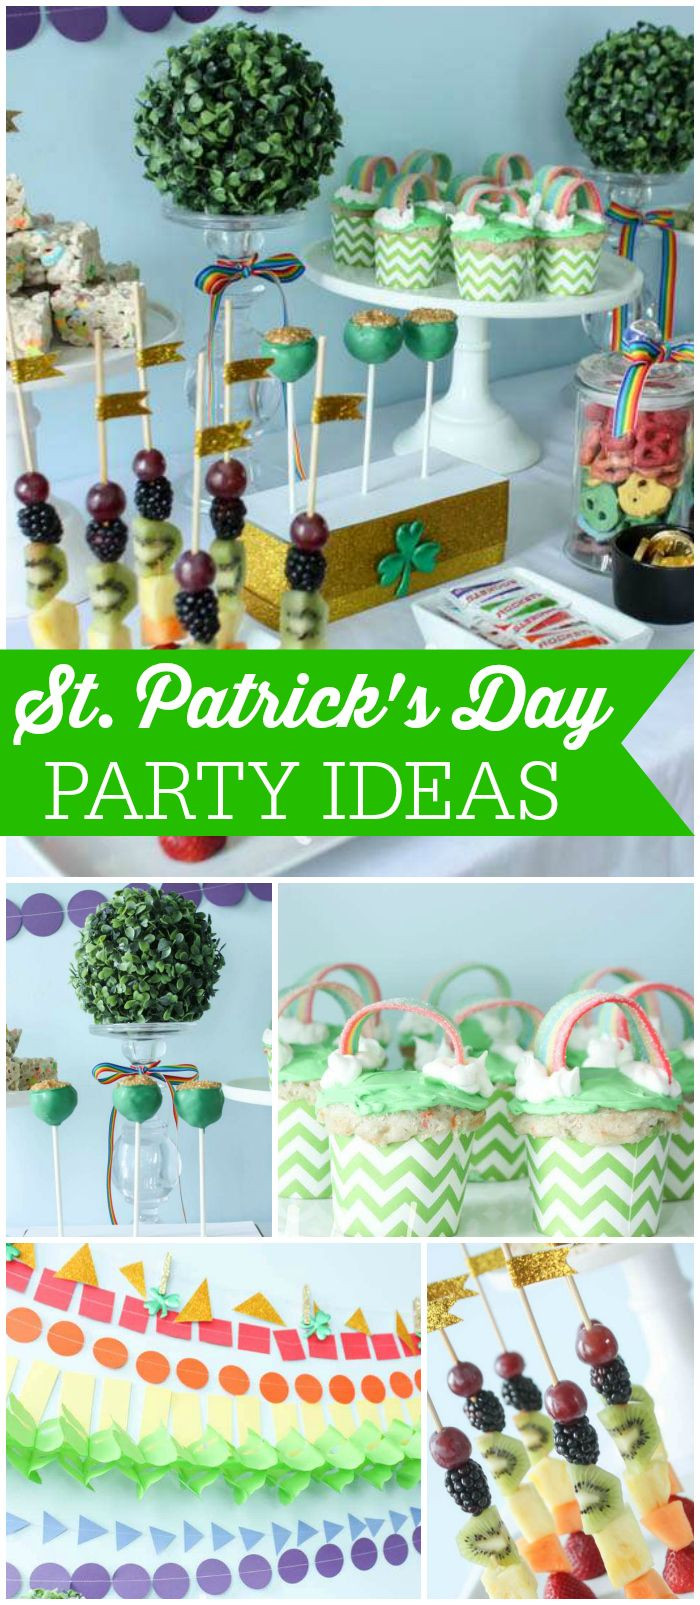 St Patrick's Day Food Ideas For Parties
 286 best St Patrick s Day Party Ideas images on Pinterest